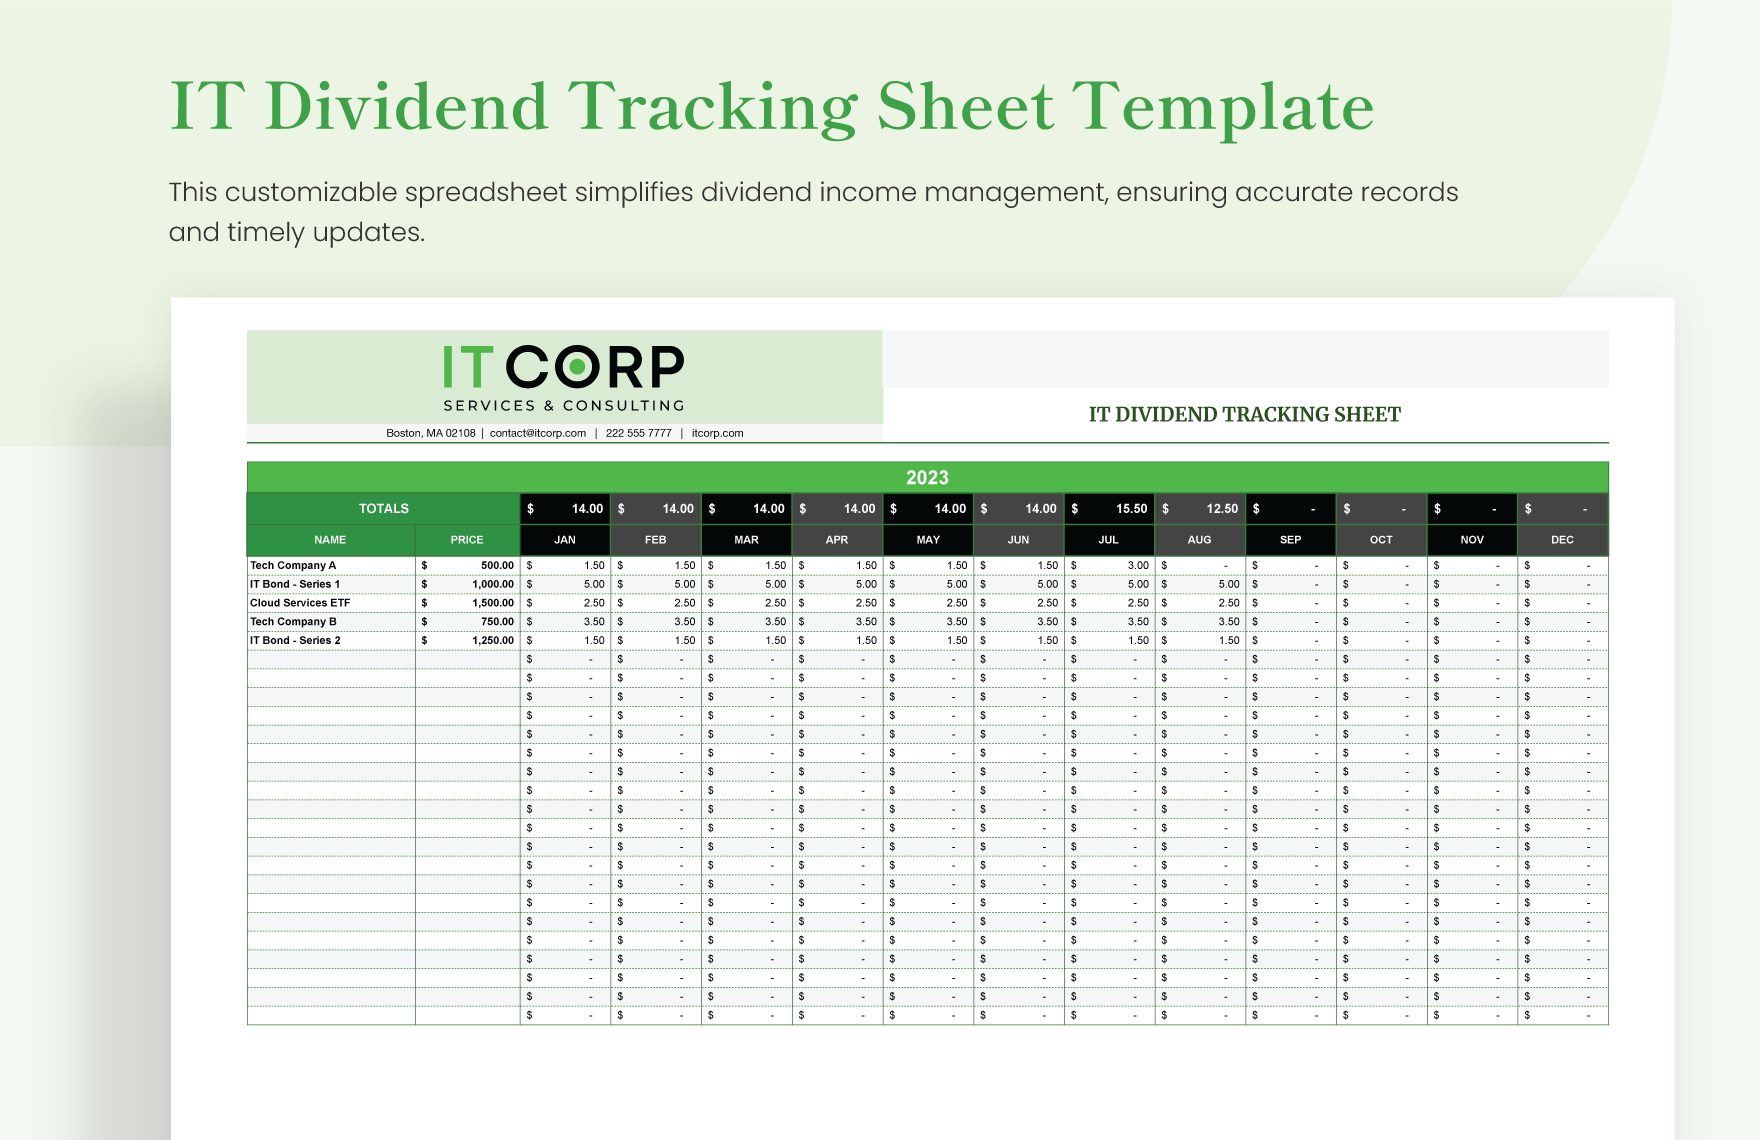 IT Dividend Tracking Sheet Template